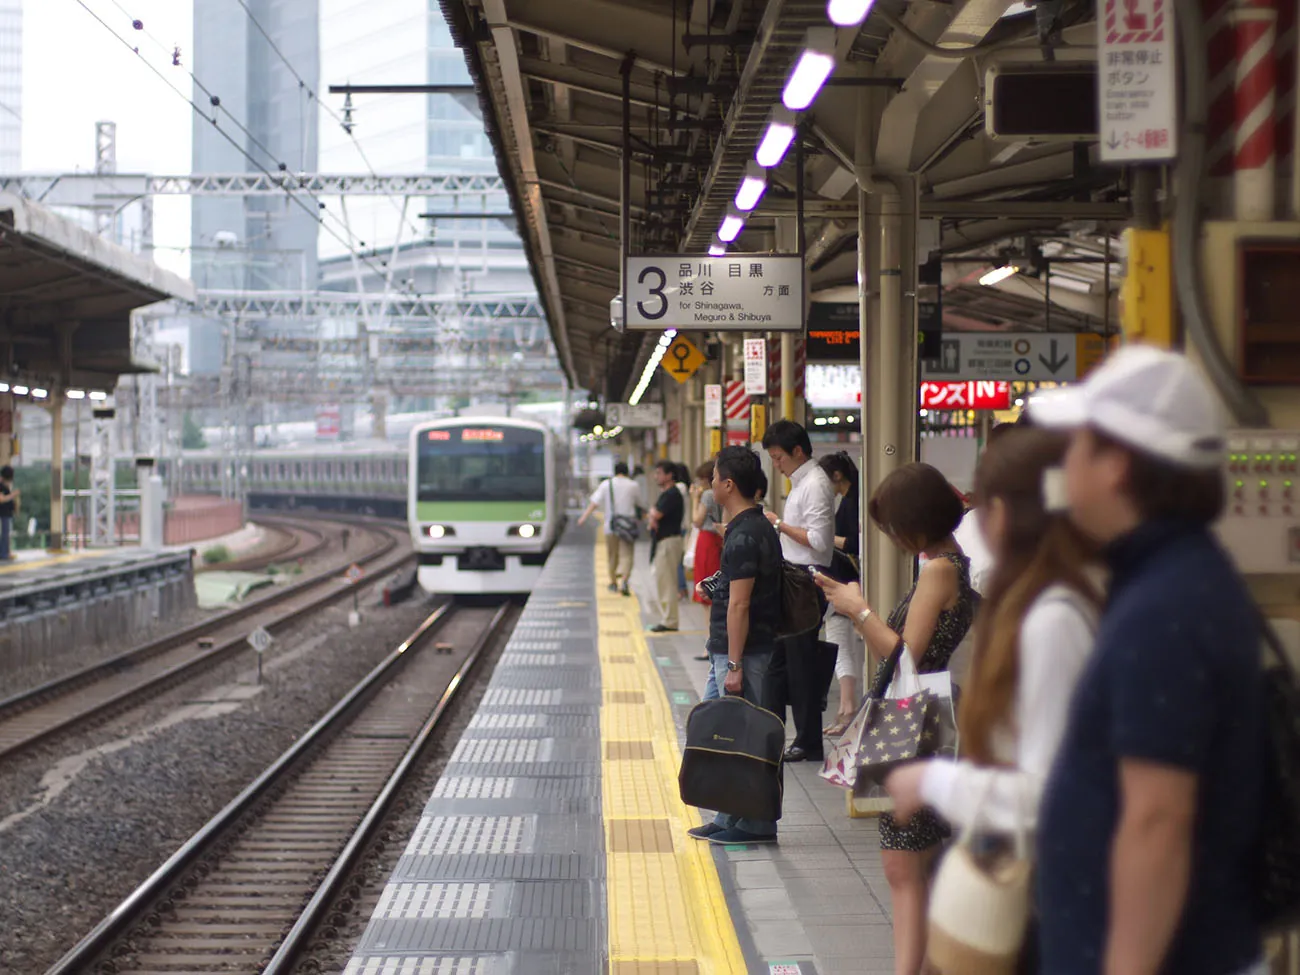 A photo shows passengers waiting while a train enters the platform at a railway station in Japan.